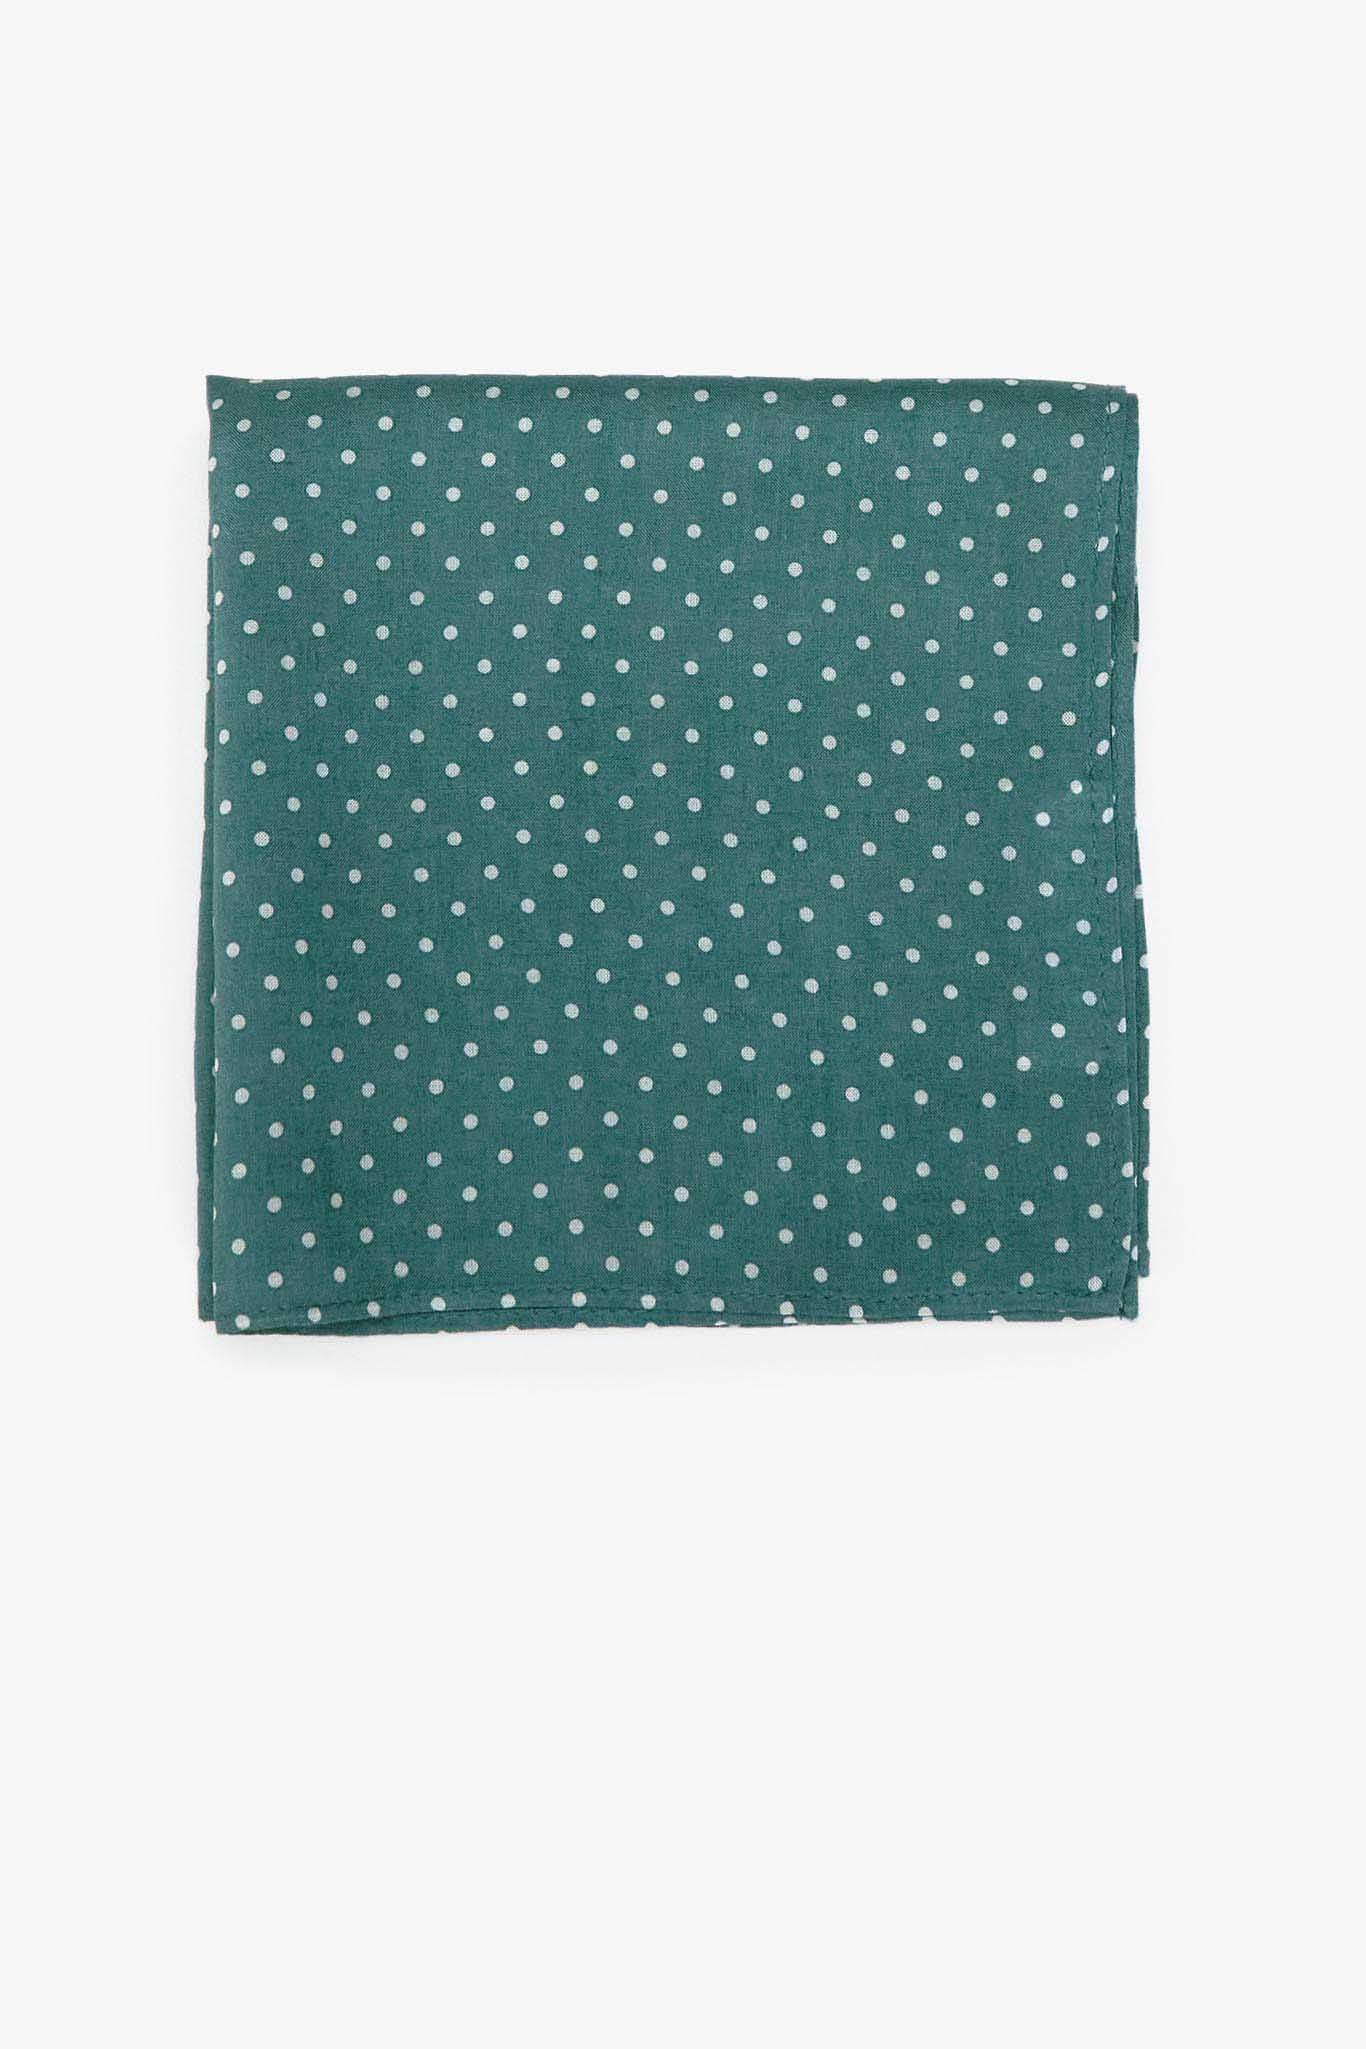 Sea green Groomsmen pocket square with white dots